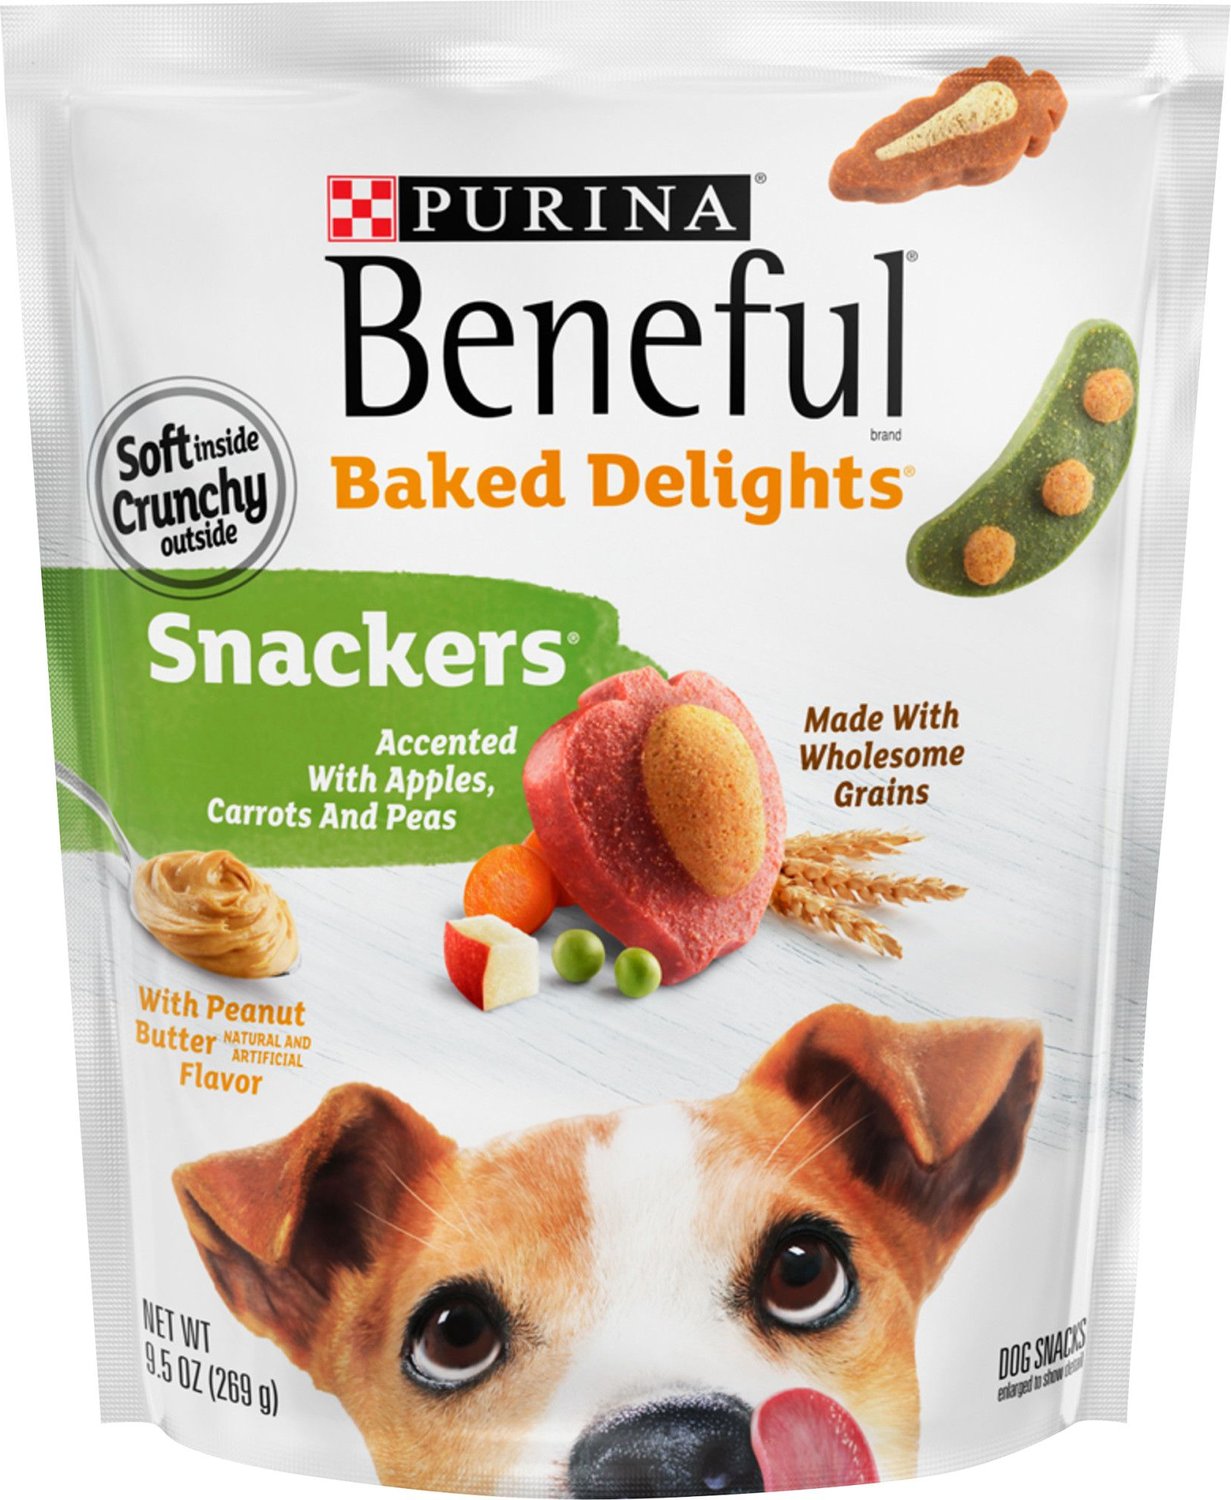 PURINA BENEFUL Baked Delights Snackers 